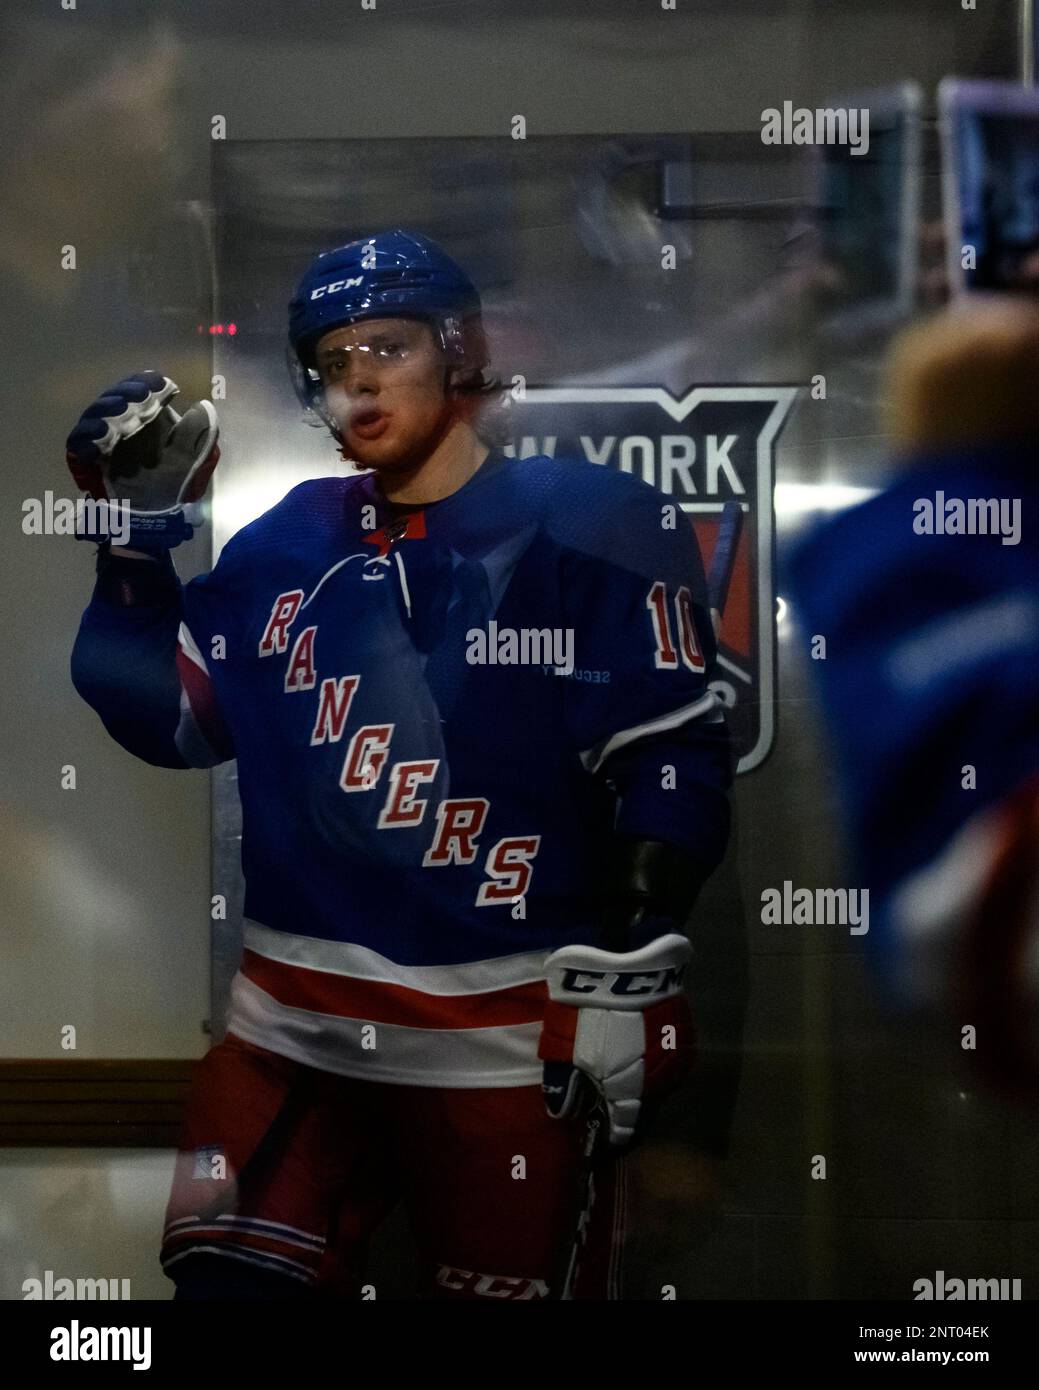 September 19, 2019: New York Rangers left wing Artemi Panarin (10) comes  out of the locker room and in to the tunnel as fans watch during the  pre-season game betweenThe New York